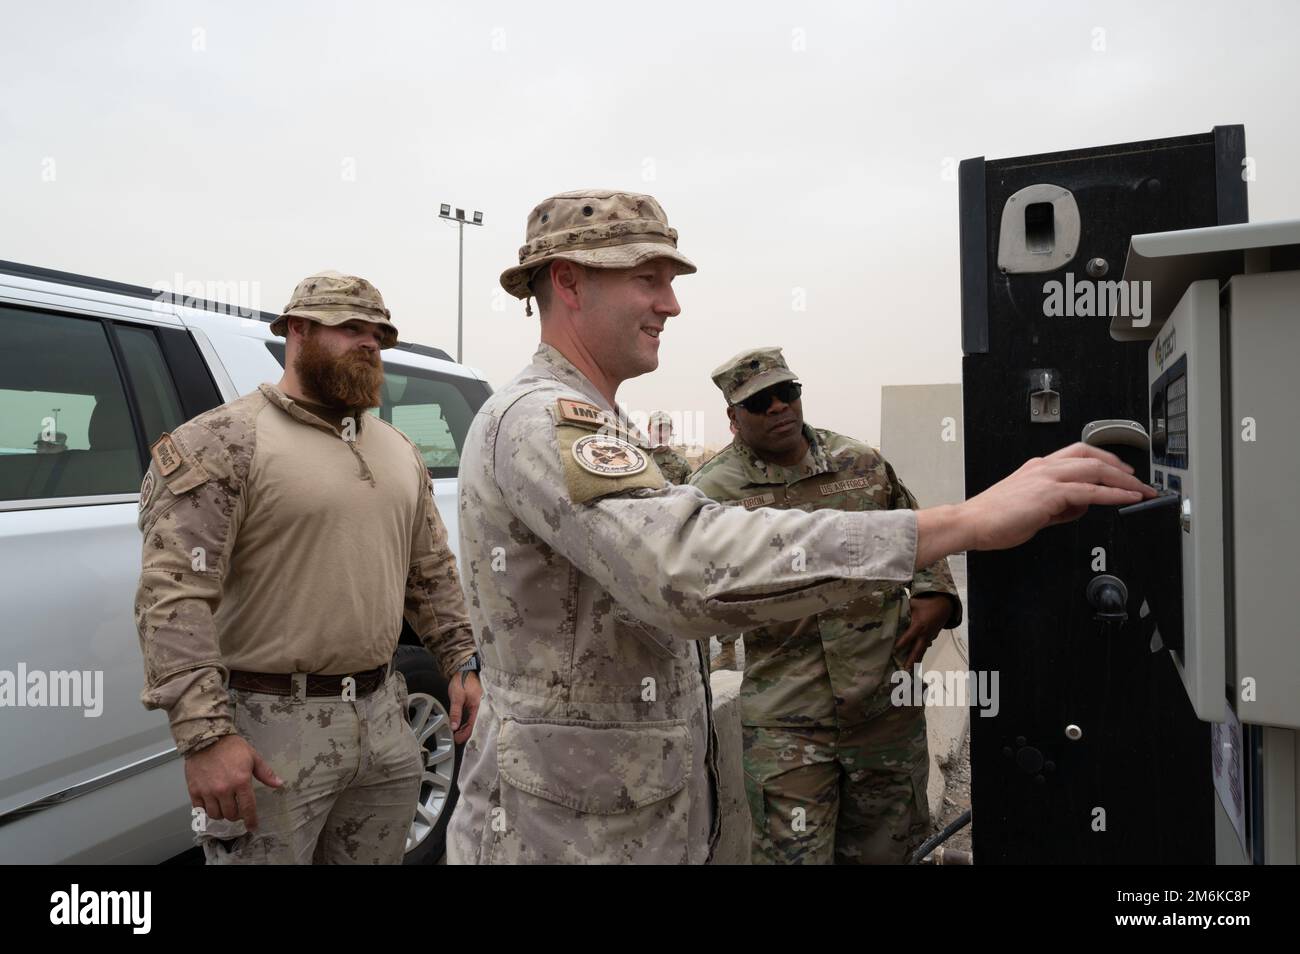 Canadian Army Master Warrant Officer Martin Blais, vehicle fleet manager, Osh-Swa, Joint Task Force-IMPACT, enters his vehicle’s license plate number in a new automated fuels service pedestal before pumping gas at Pump 3 at Ali Al Salem Air Base, Kuwait, April 29, 2022. The new automated fuels service replaces an outdated process and improves billing and tracking efficiency, speed and accuracy. Stock Photo